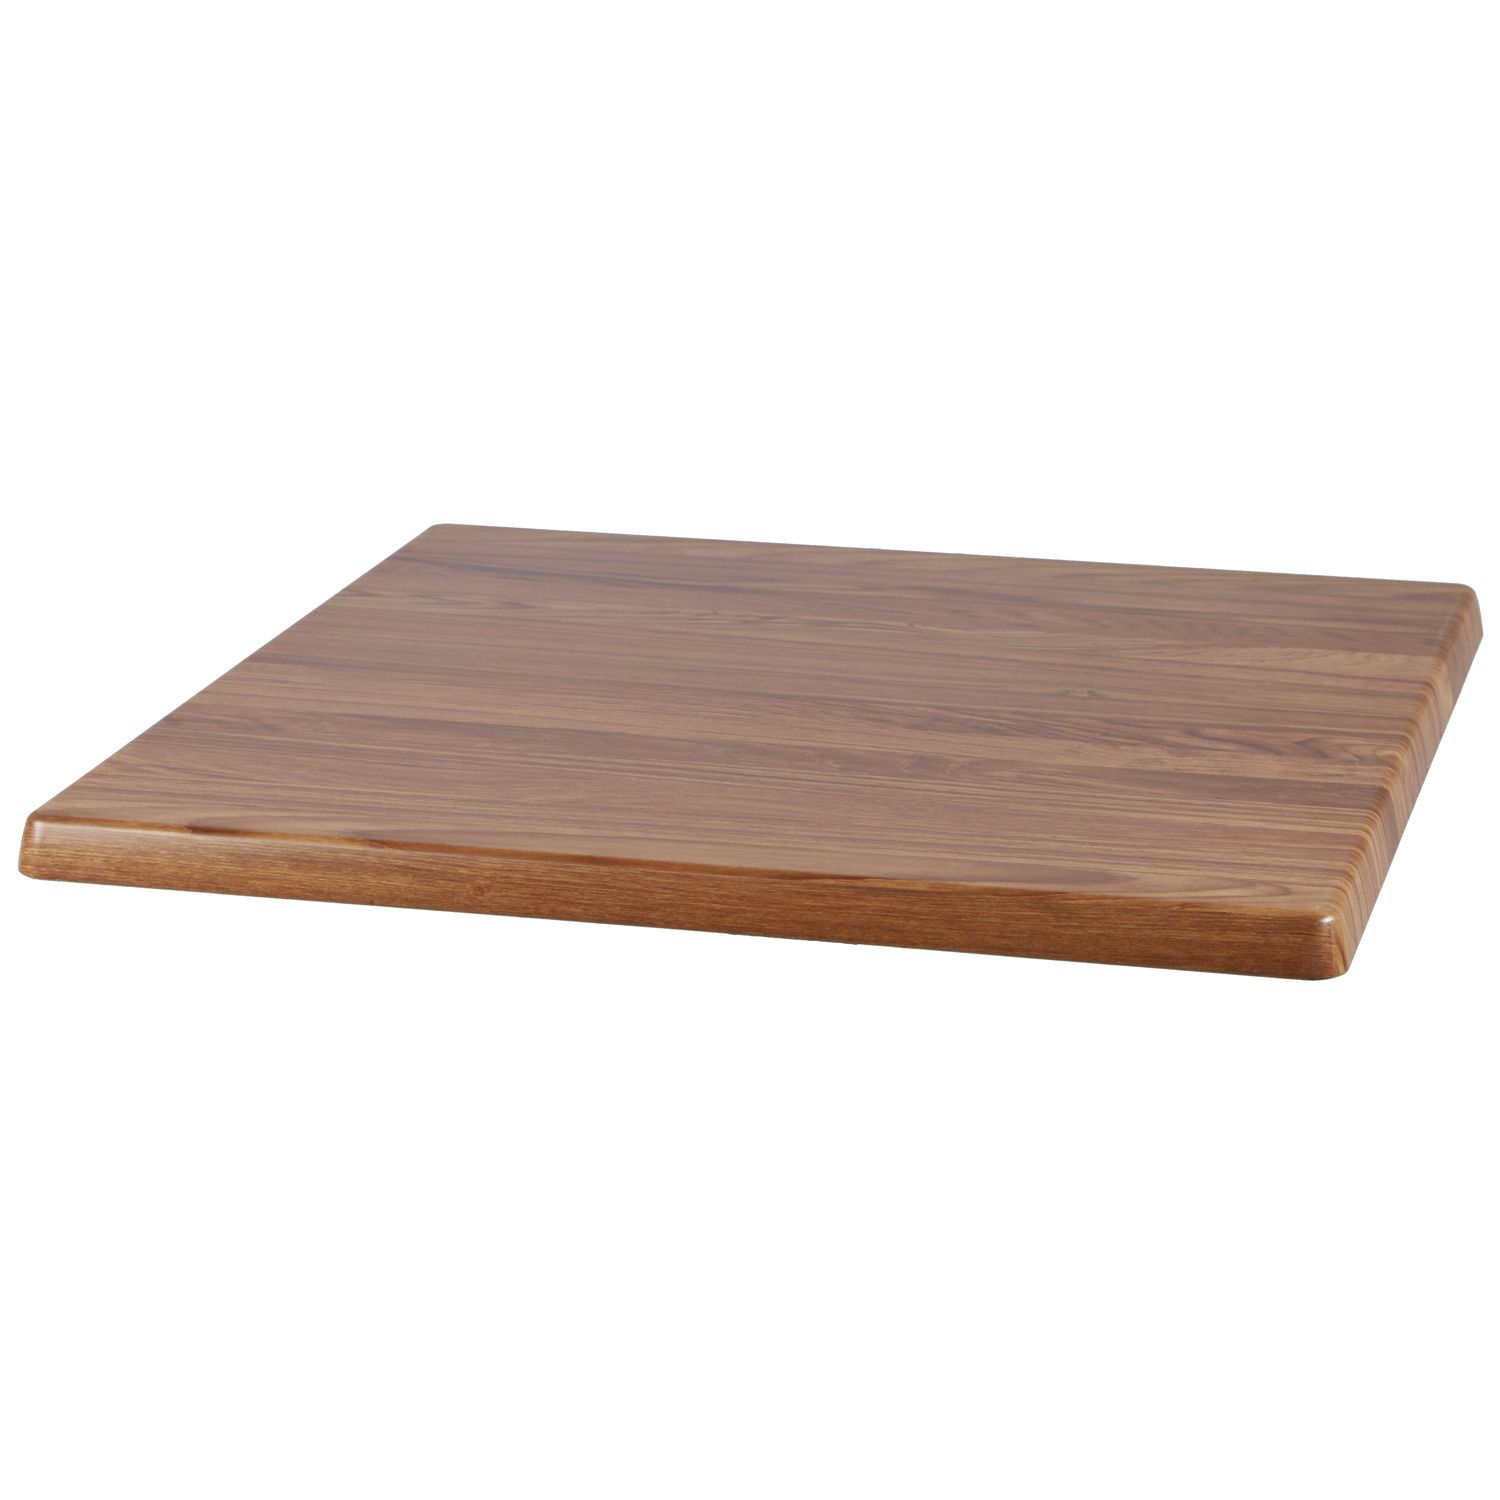 32 x 28 Solid Wood Table Top